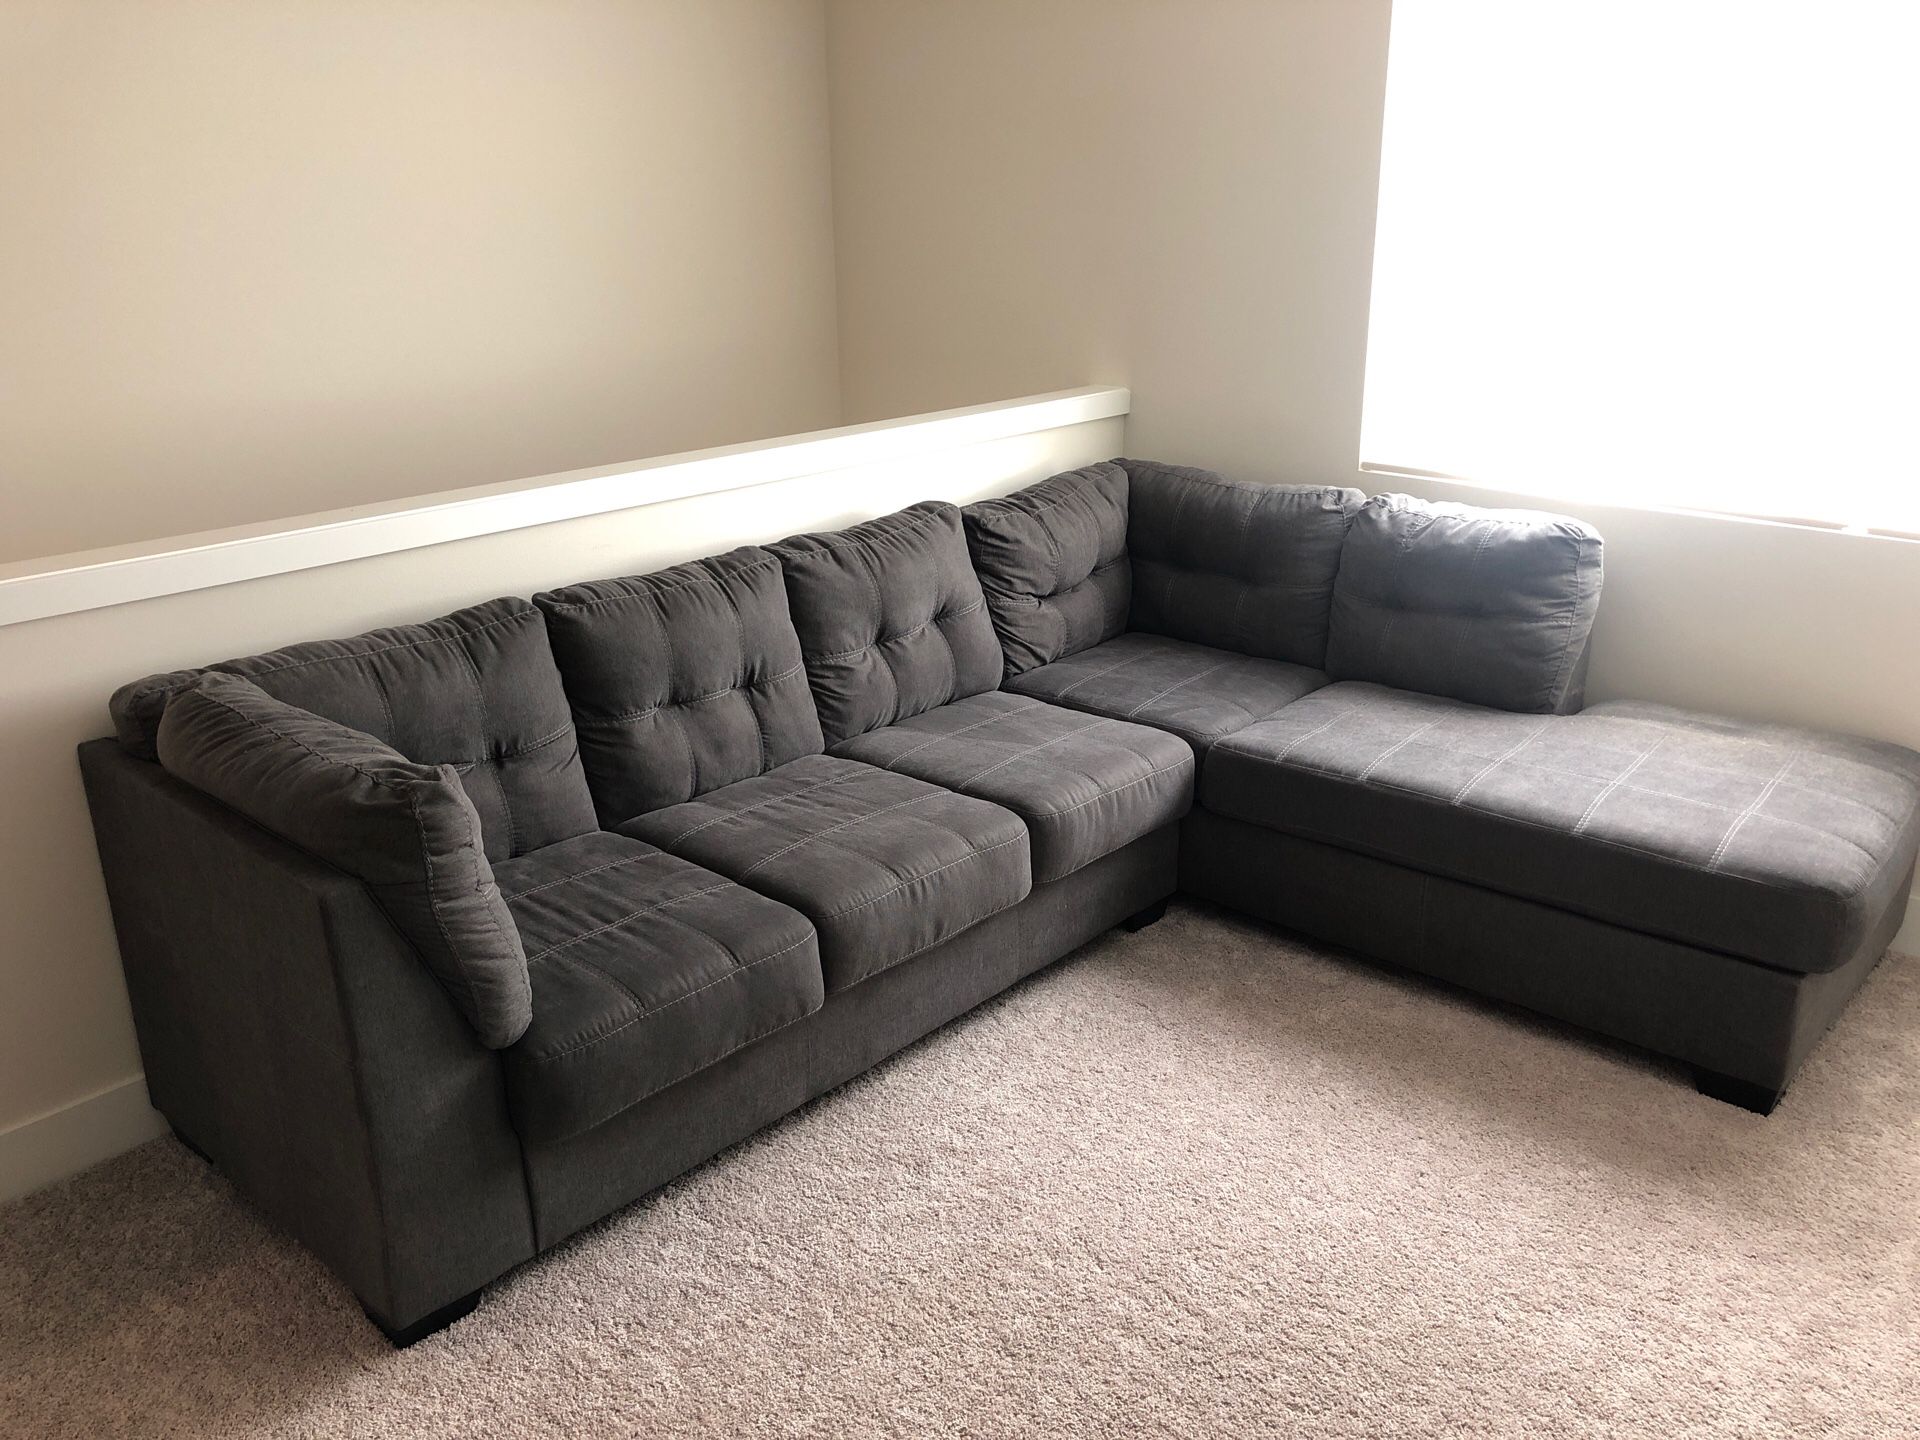 Large used gray sectional couch